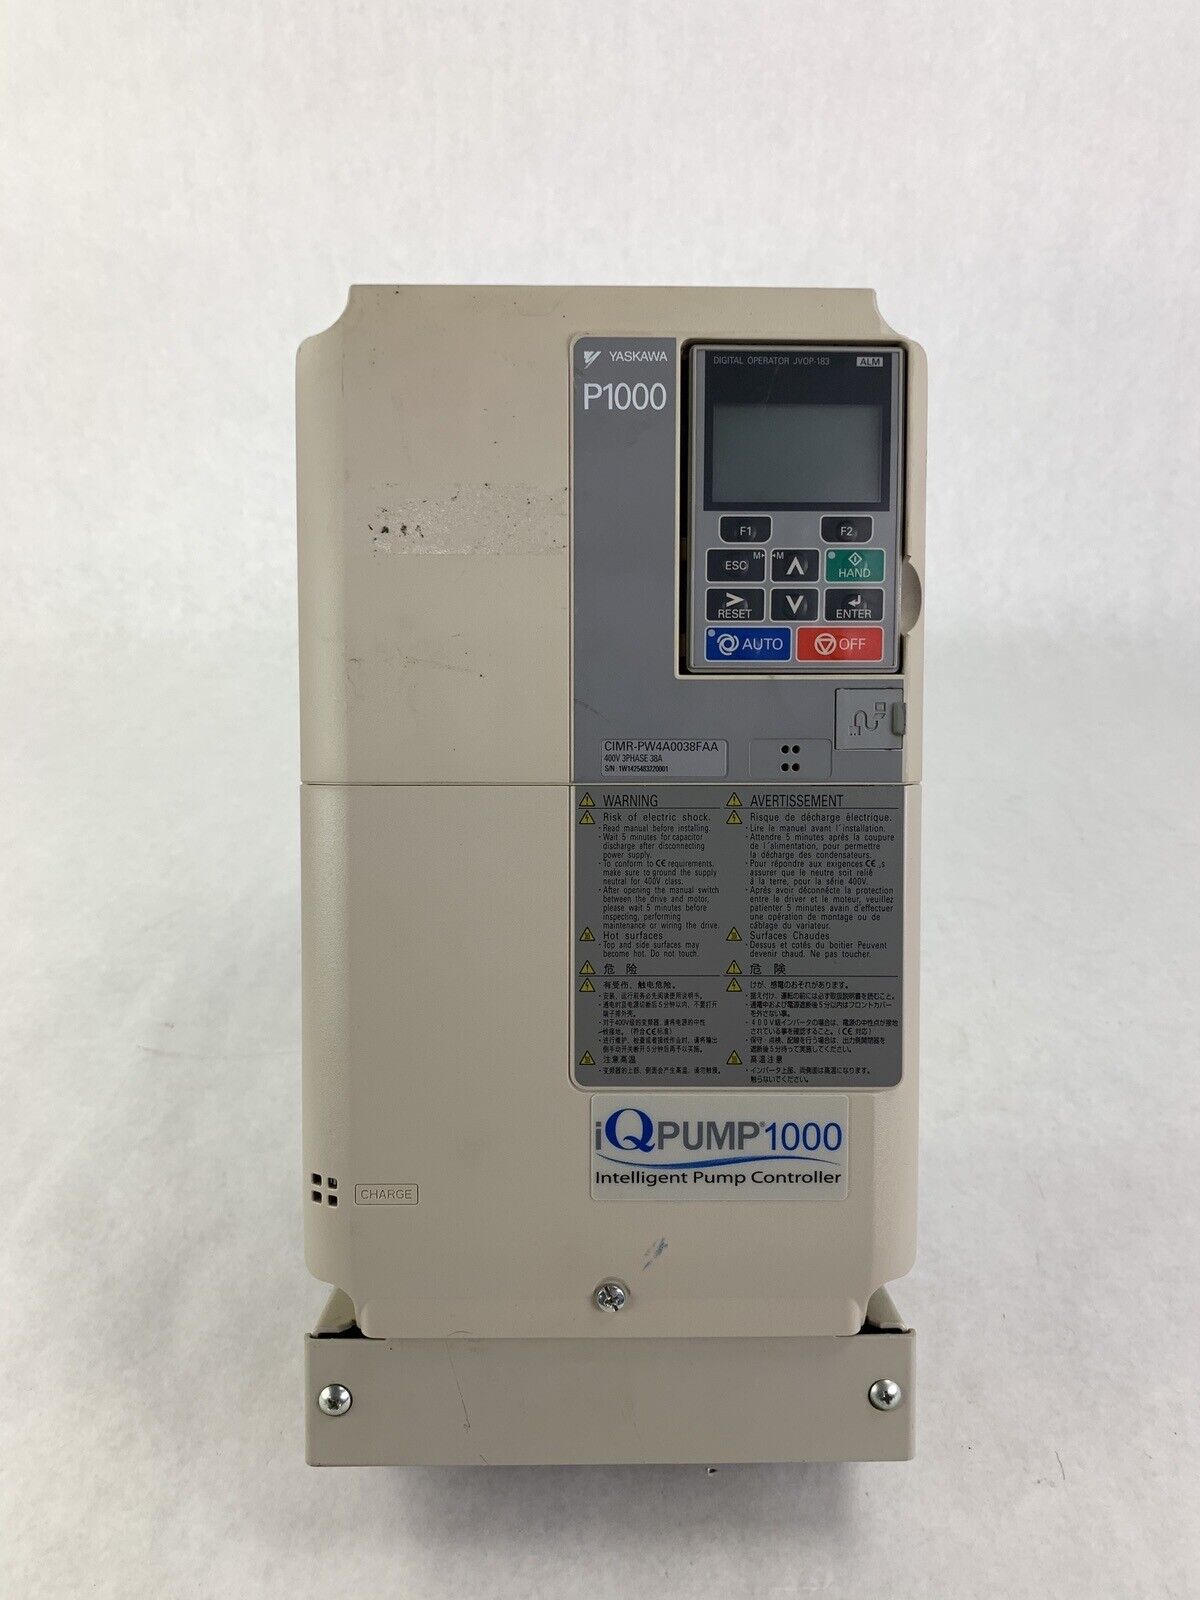 Yaskawa P1000 200V 3 Phase 8A Variable Frequency drive CIMR-PW4A0038FAA